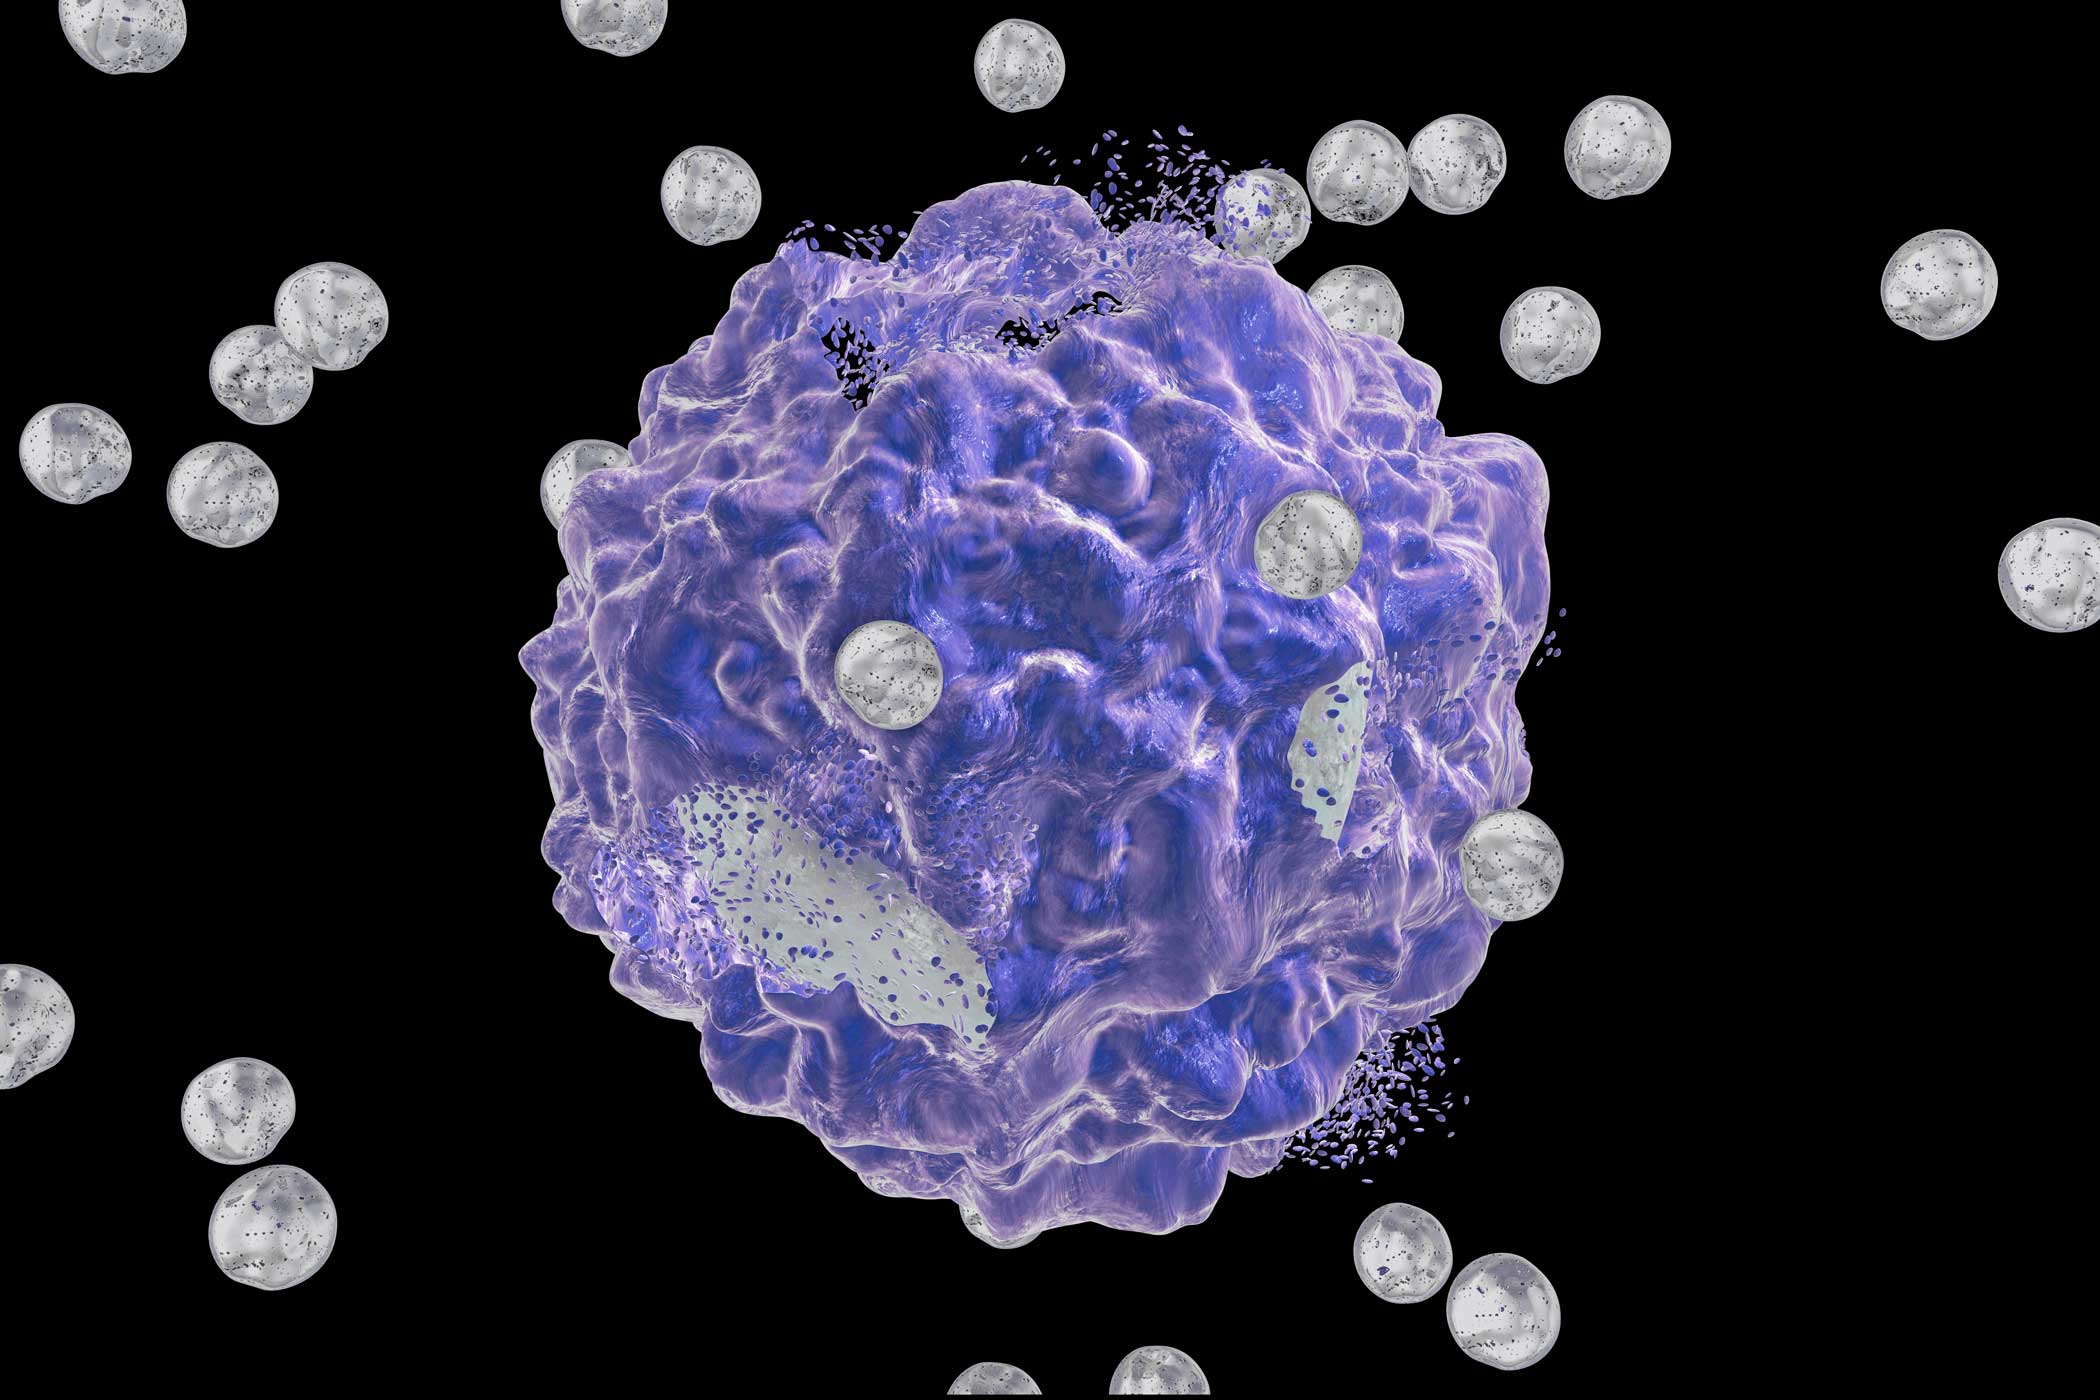 A round mauve-coloured cancer cell being attacked by smaller, silver-coloured nanoparticles.